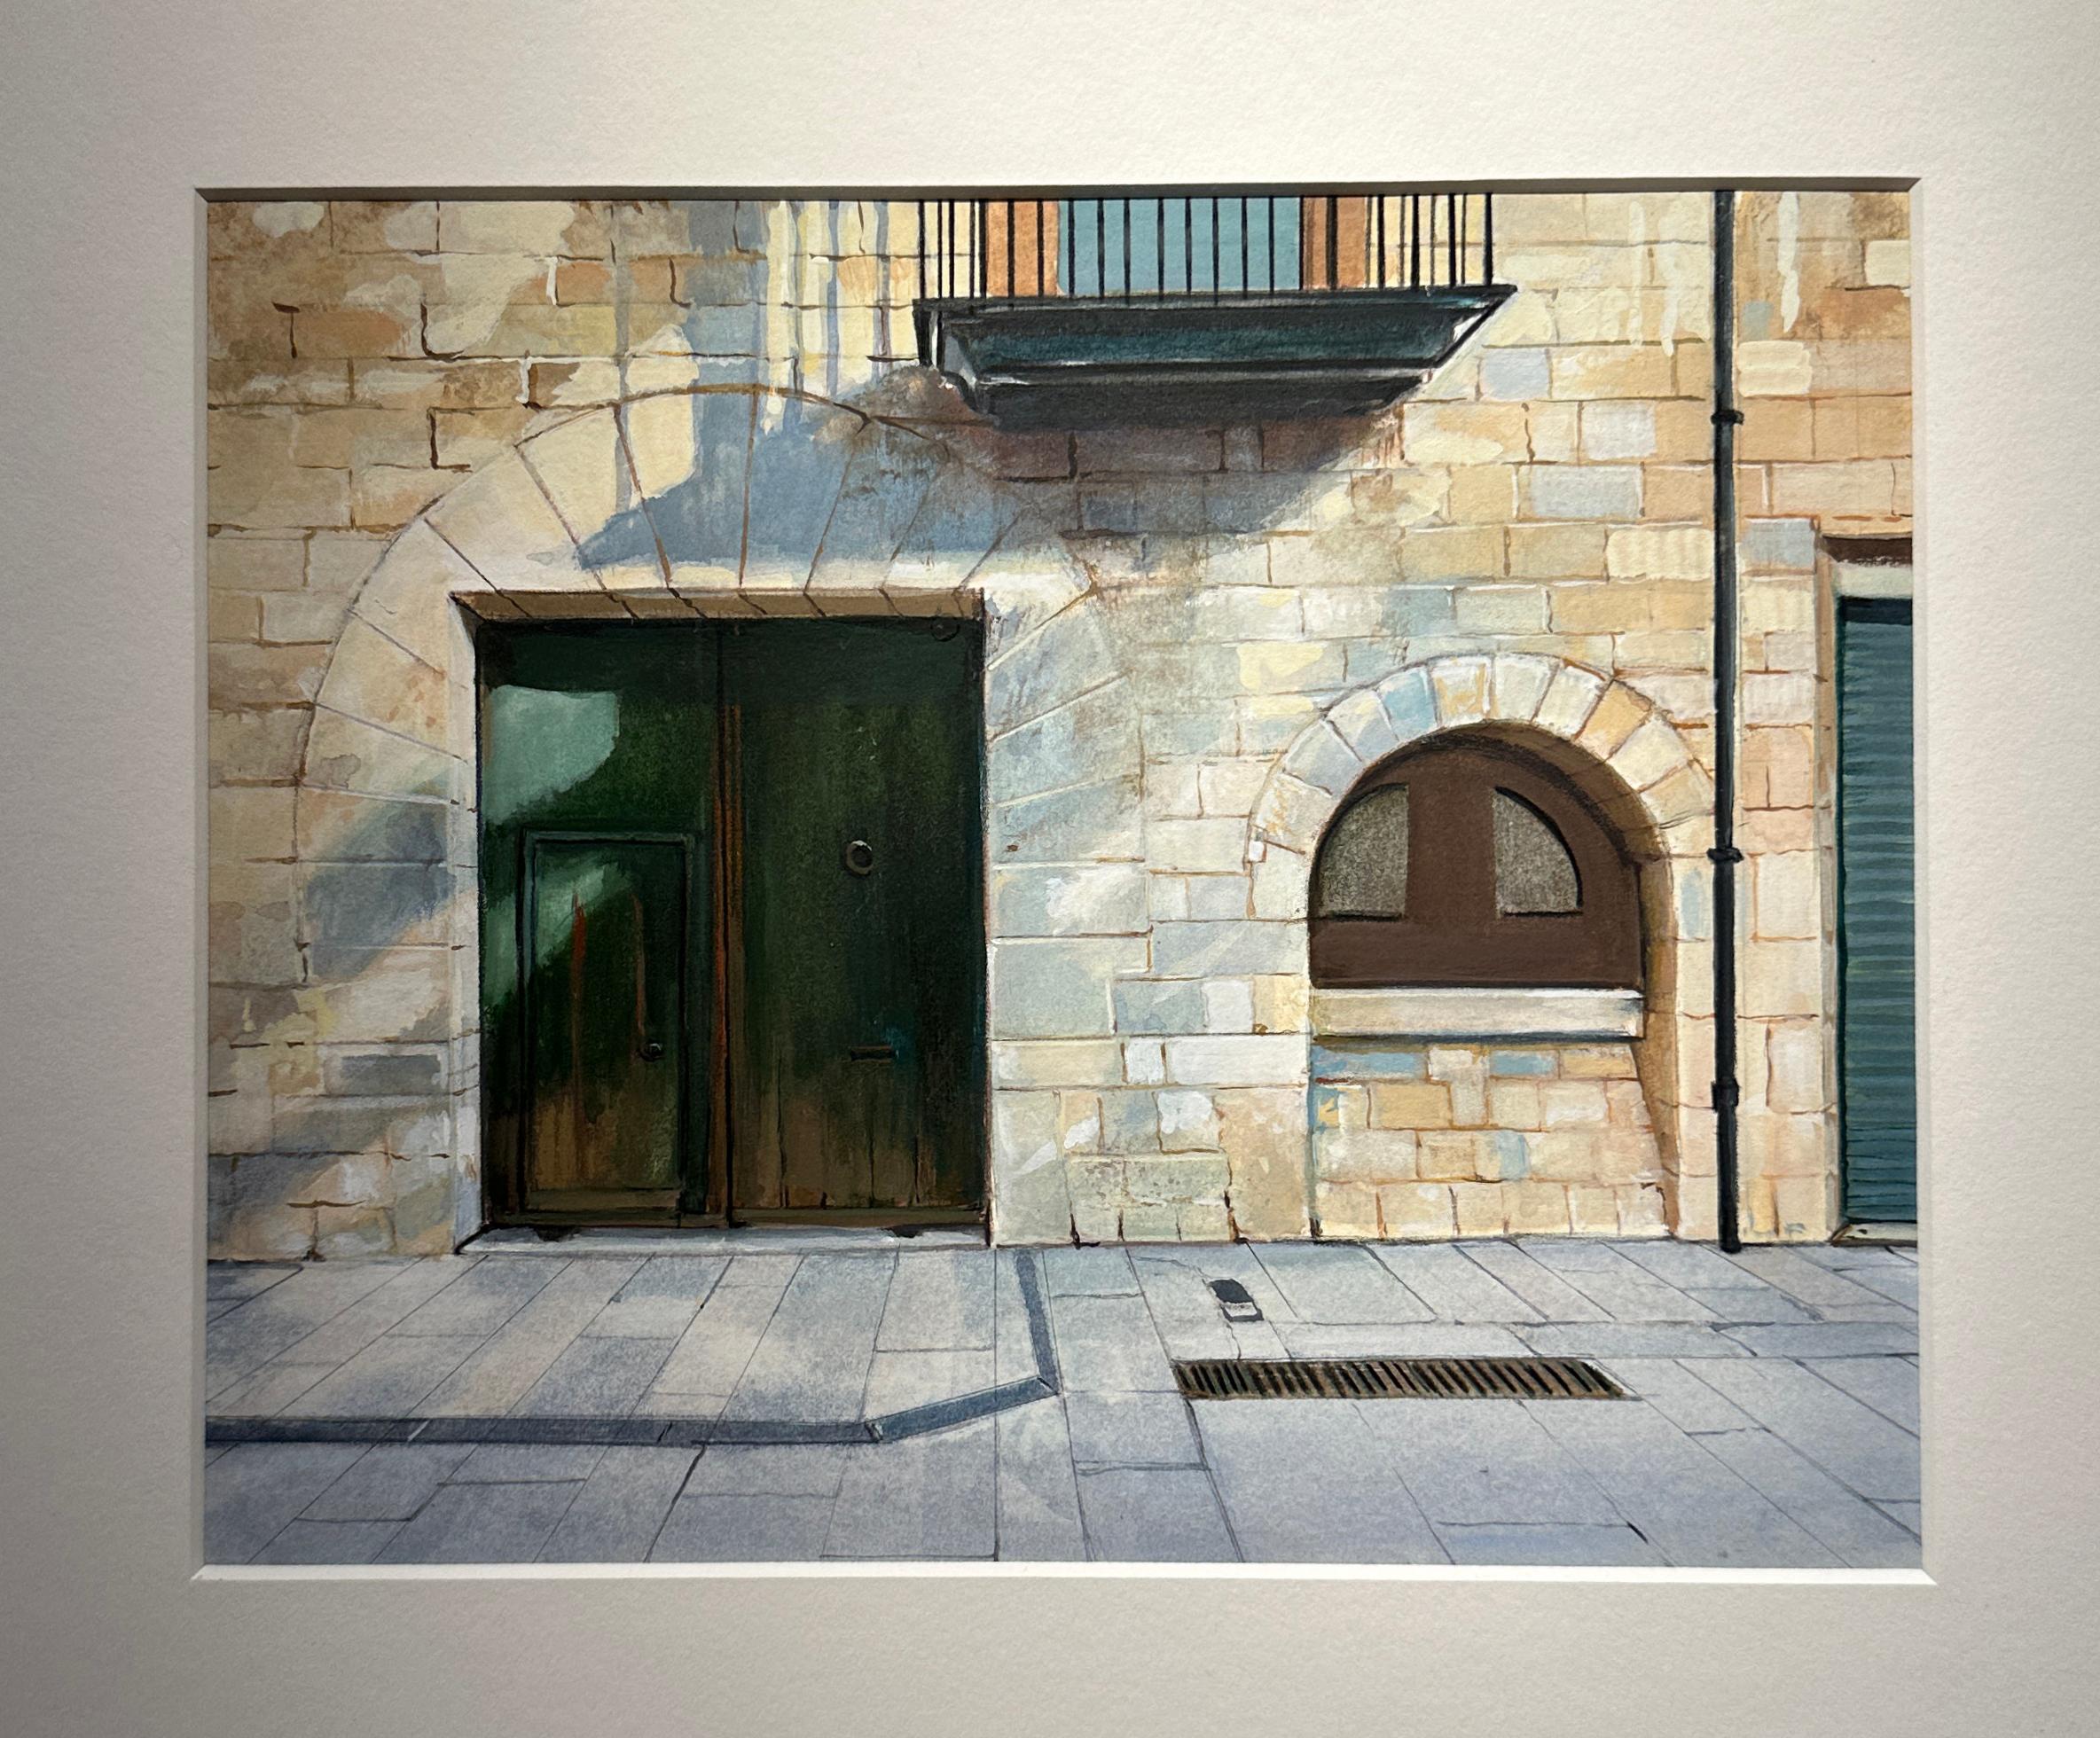 Aquardar (Waiting Expectantly) - Architectural Imagery, Doorways, Dappled Light For Sale 2